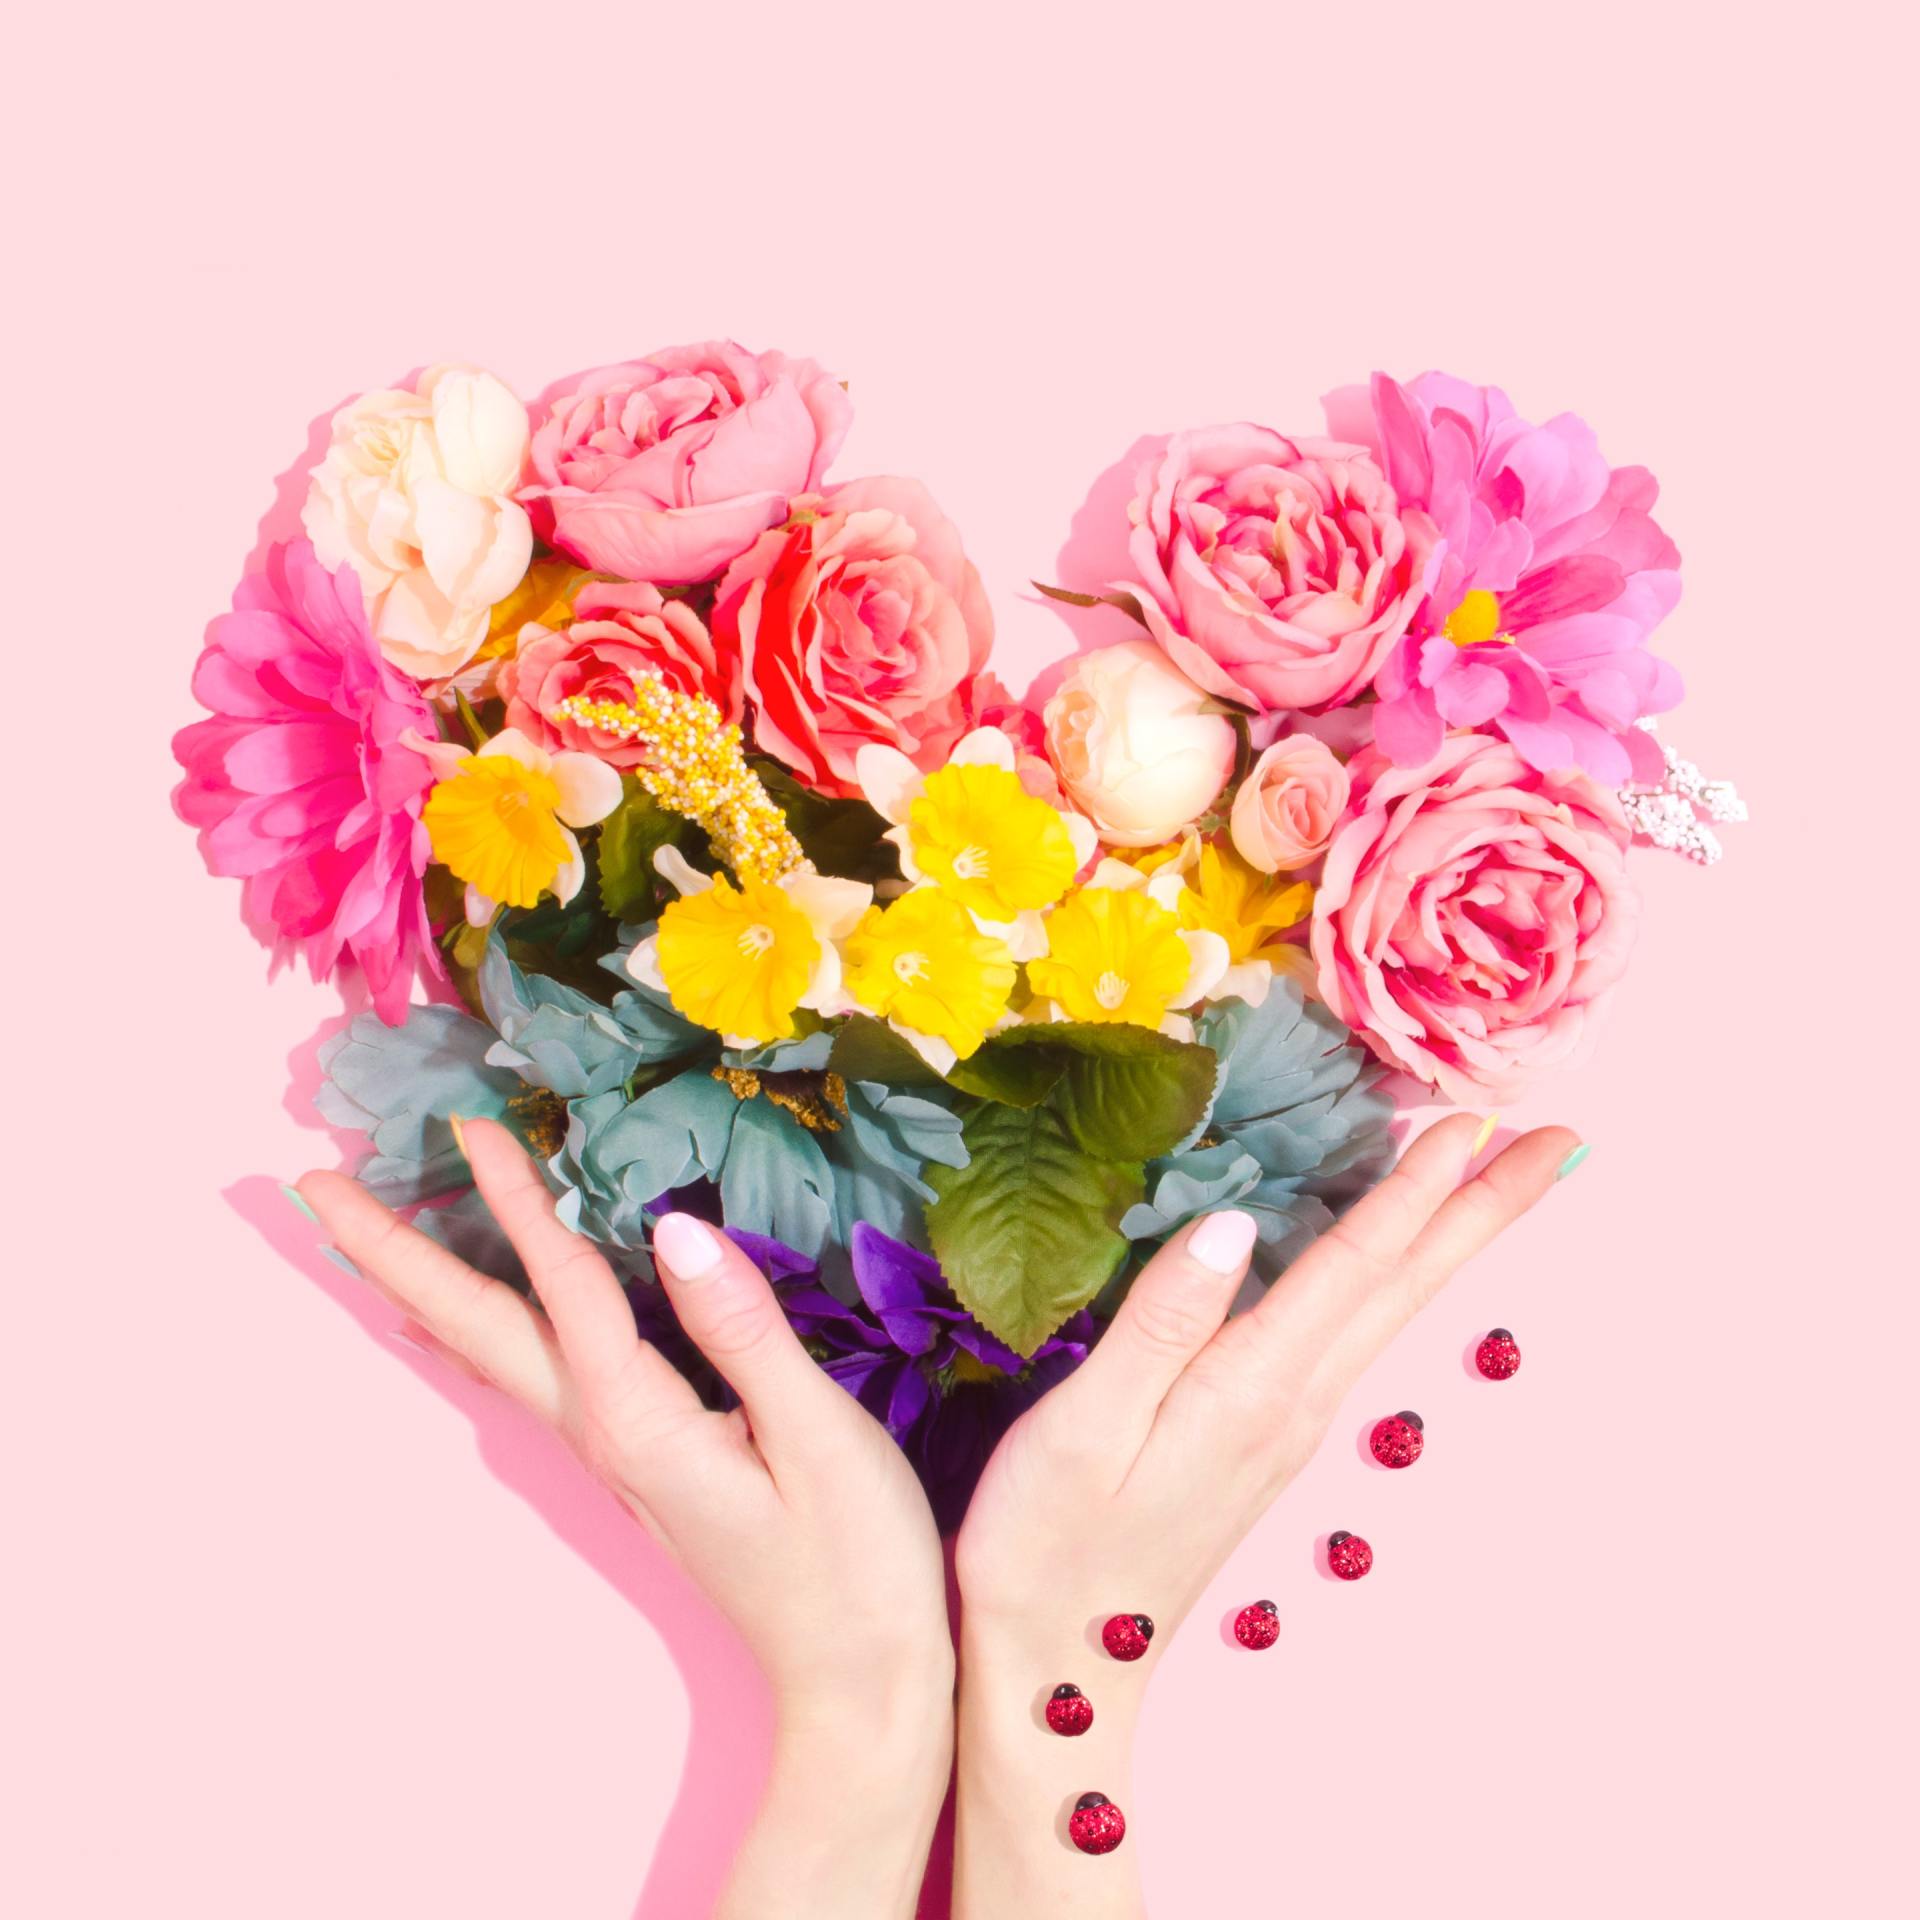 flowers held by two hands on a pink background